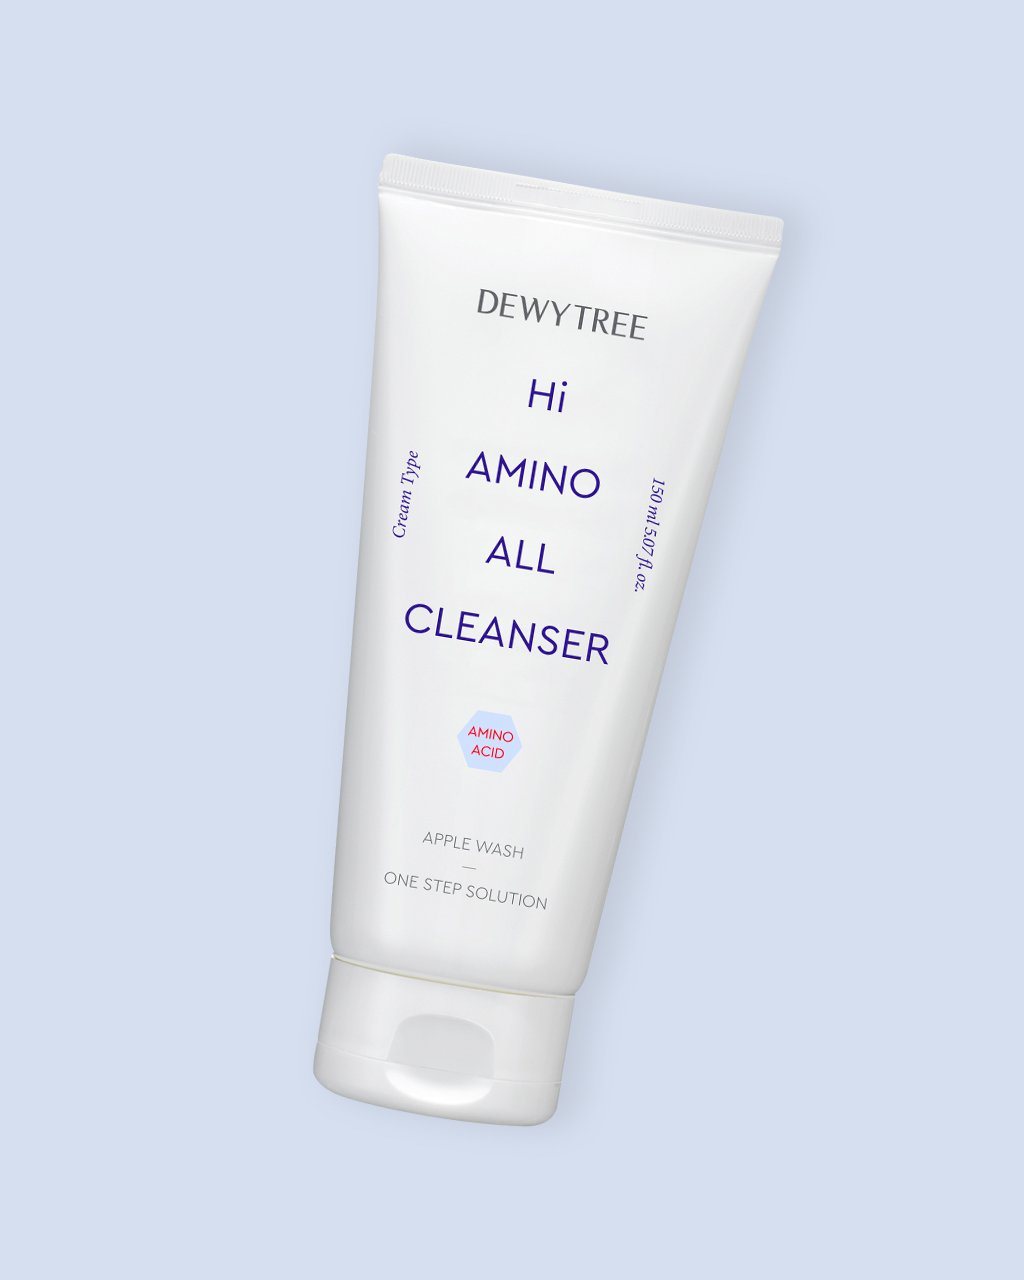 Hi Amino All Cleanser Water Cleanser DEWYTREE 